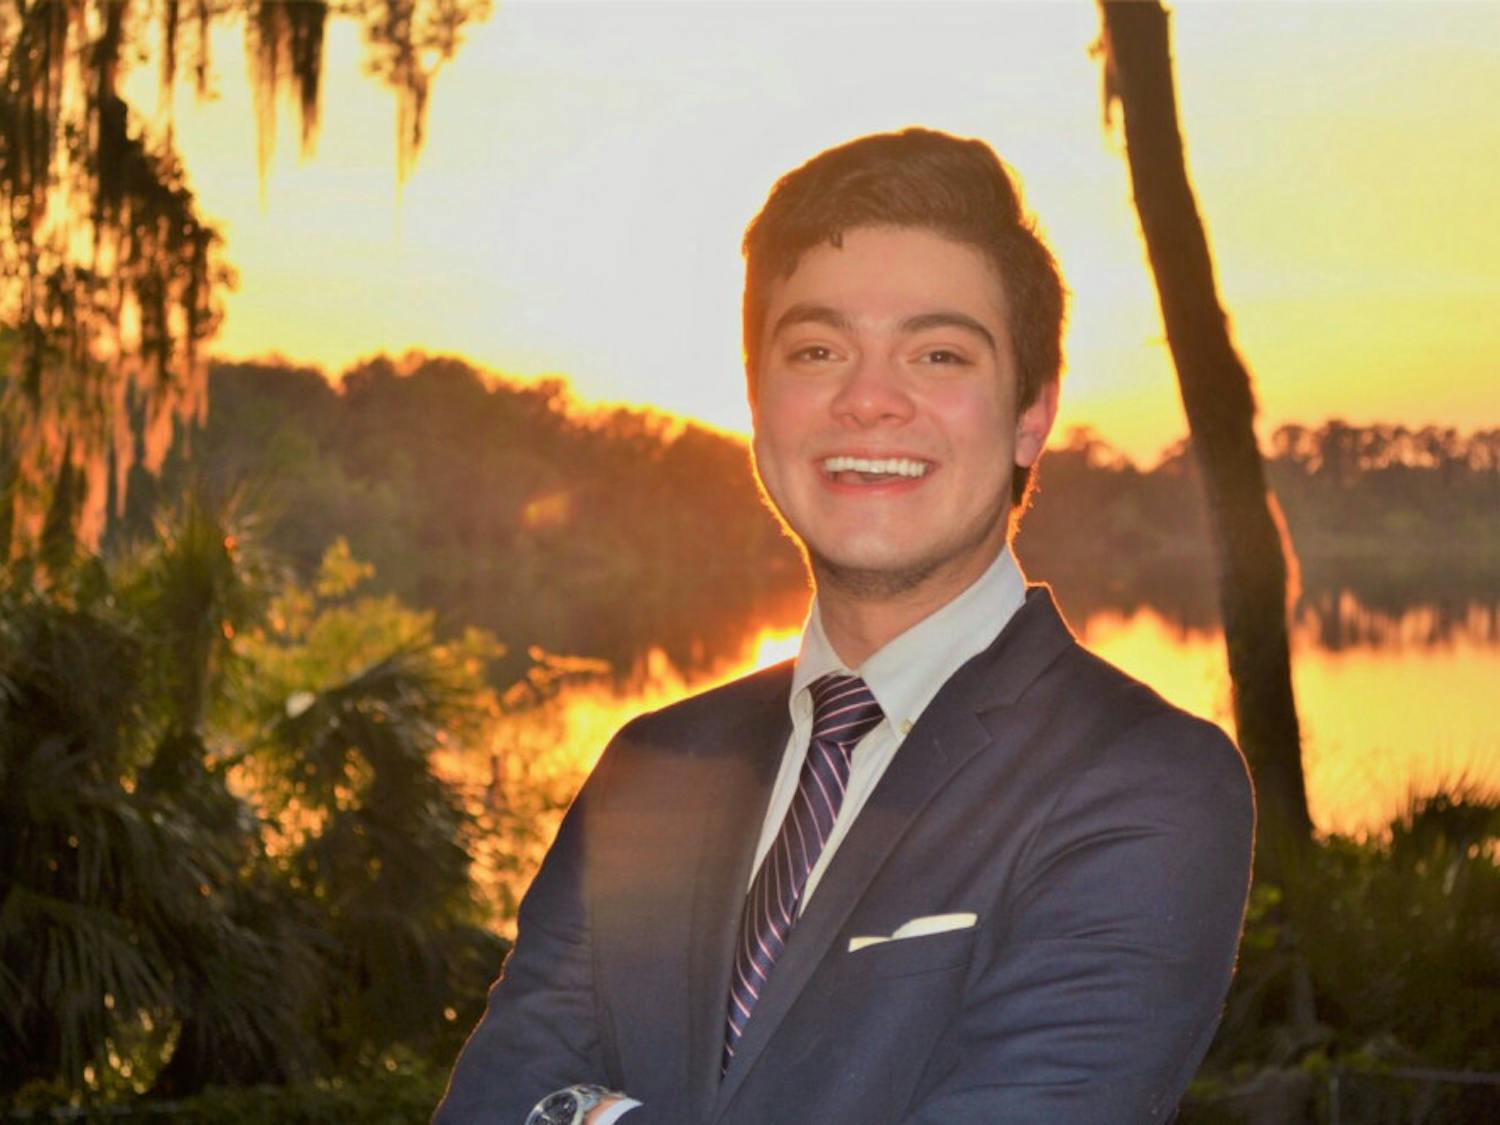 Herman Younger, 23, began a petition to create a restaurant workers union after being frustrated as a server at Bahama Breeze and T.G.I. Fridays. He graduated from UF in Spring 2019 with a degree in political science.